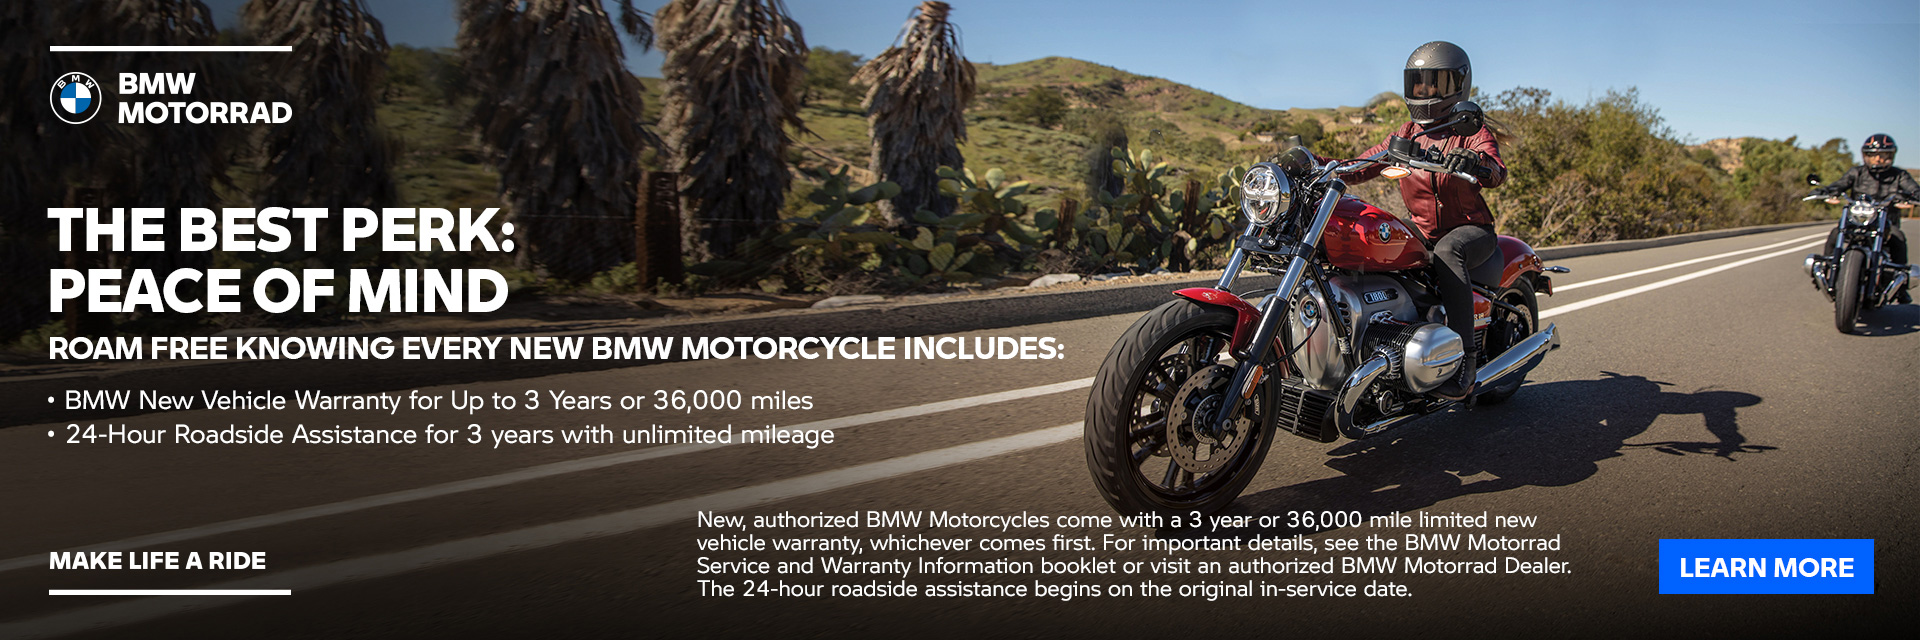 BMW Motorrad presents the new Ride & Style Collection 2023.